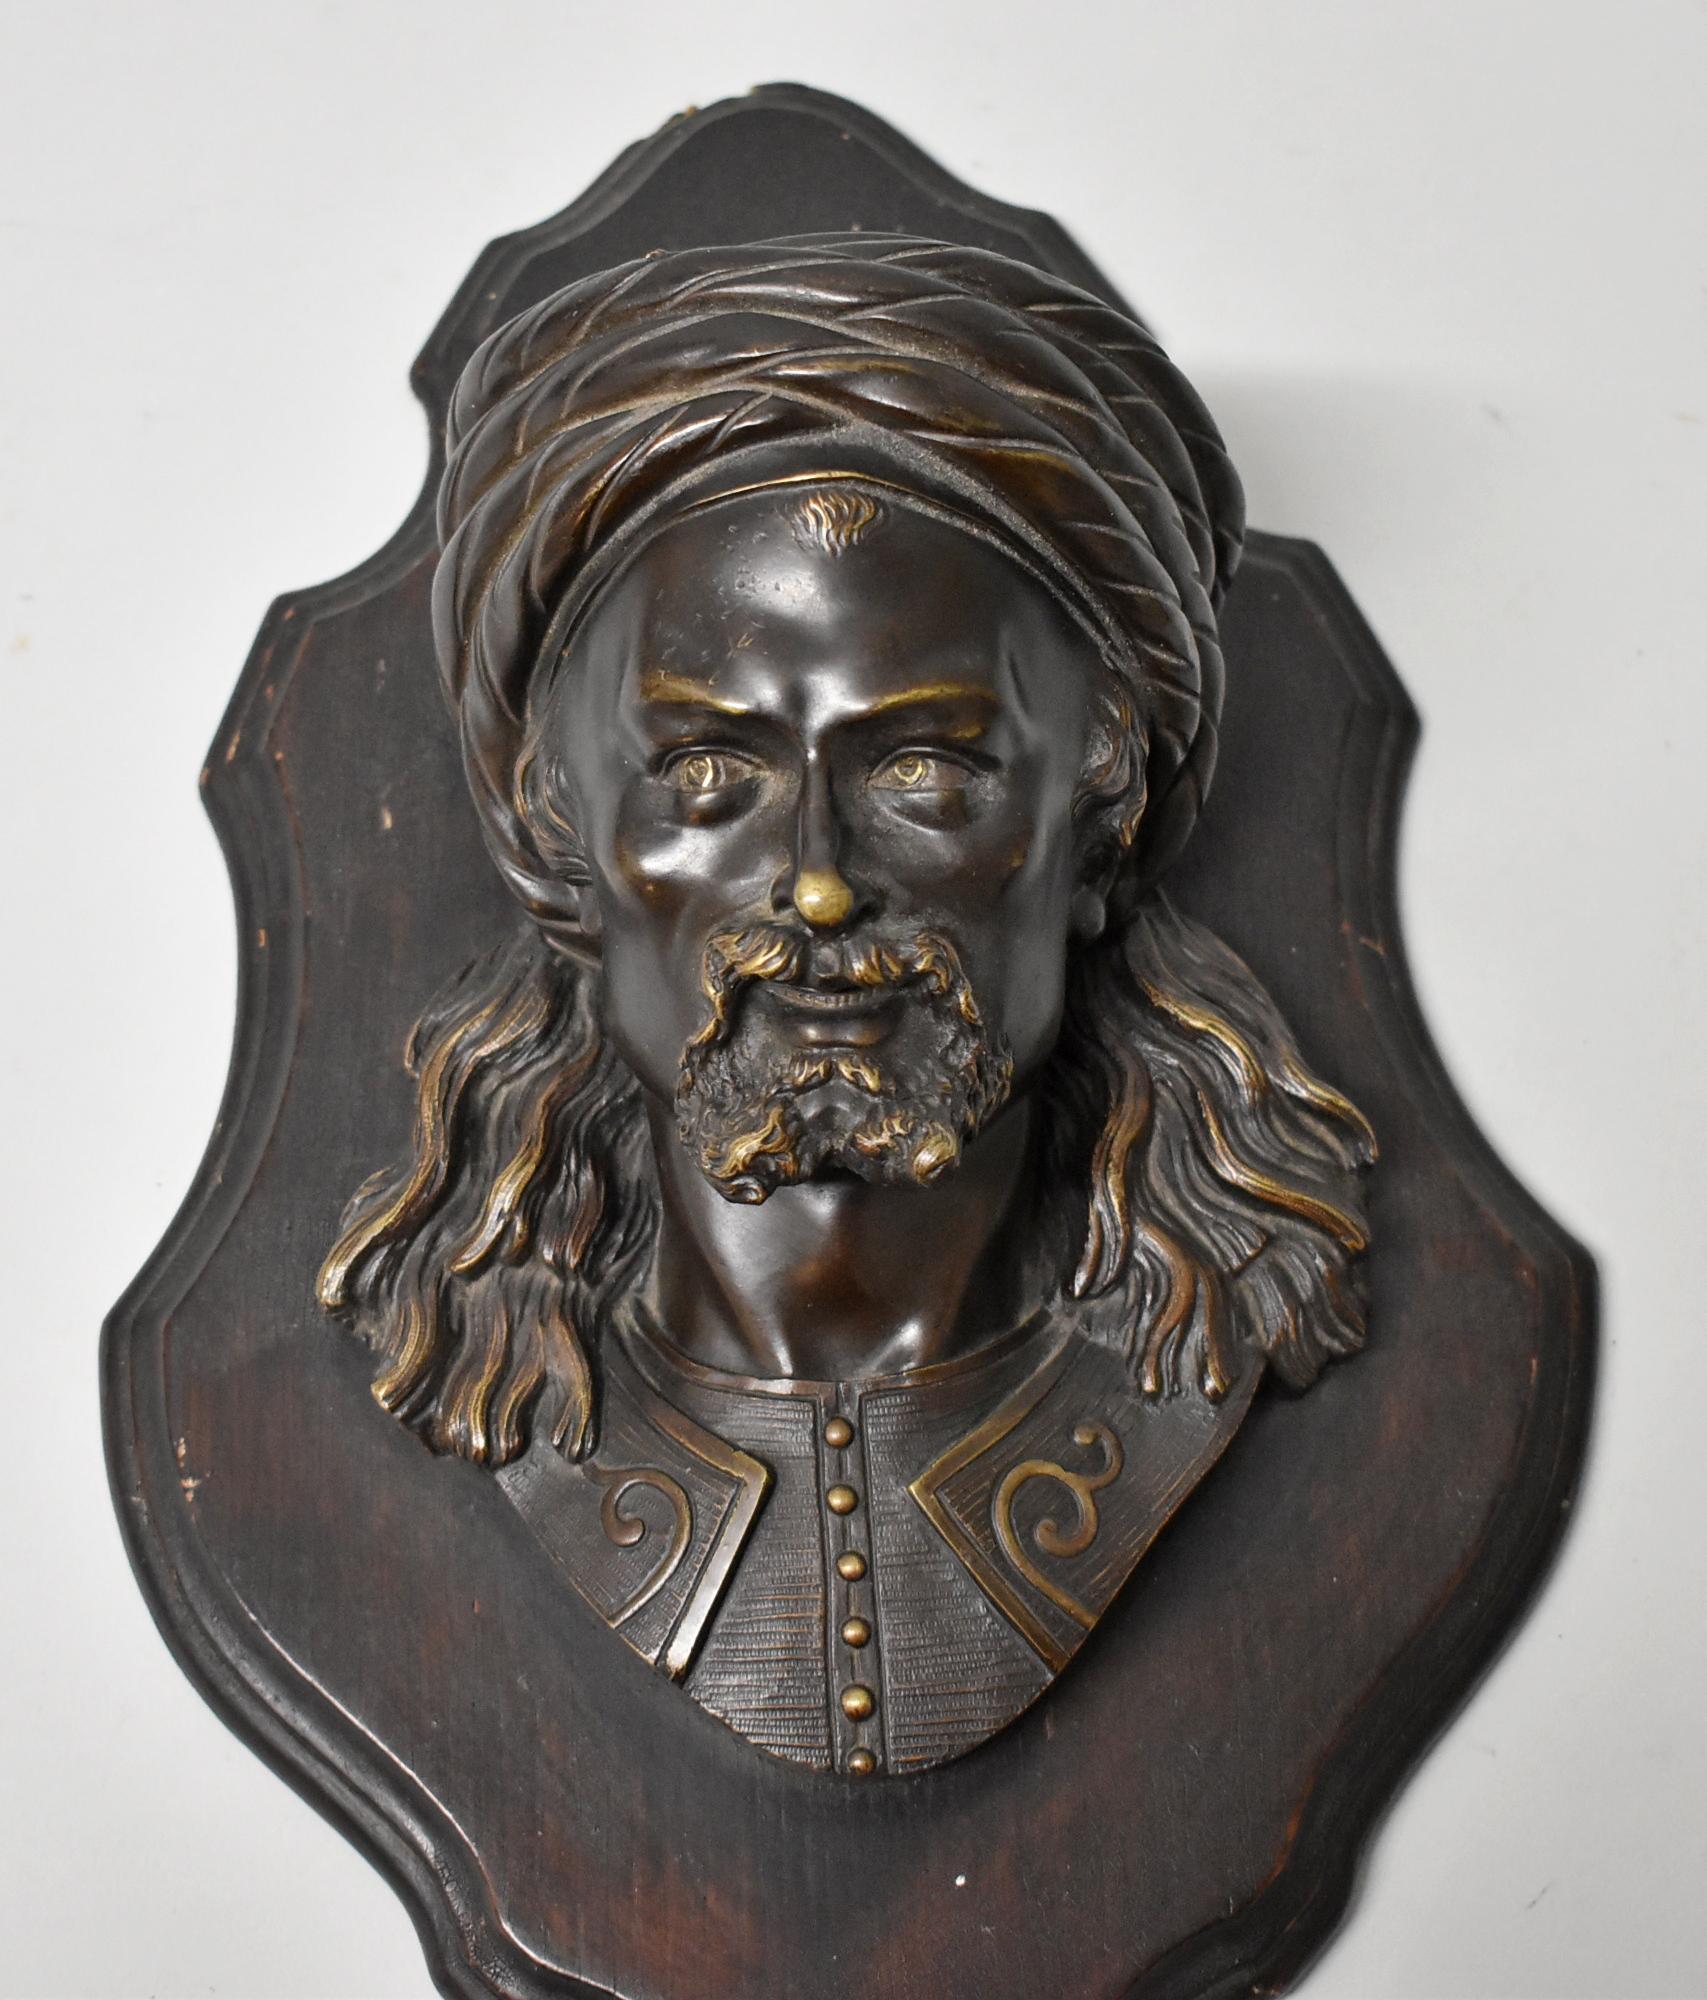 Bronze wall plaque statue of a man's head, stamped LeBlanc. Arabian man with facial hair and a turban. The bust is mounted on a wood board. There is a space between statue and plaque to use as a planter. Stamped on back 